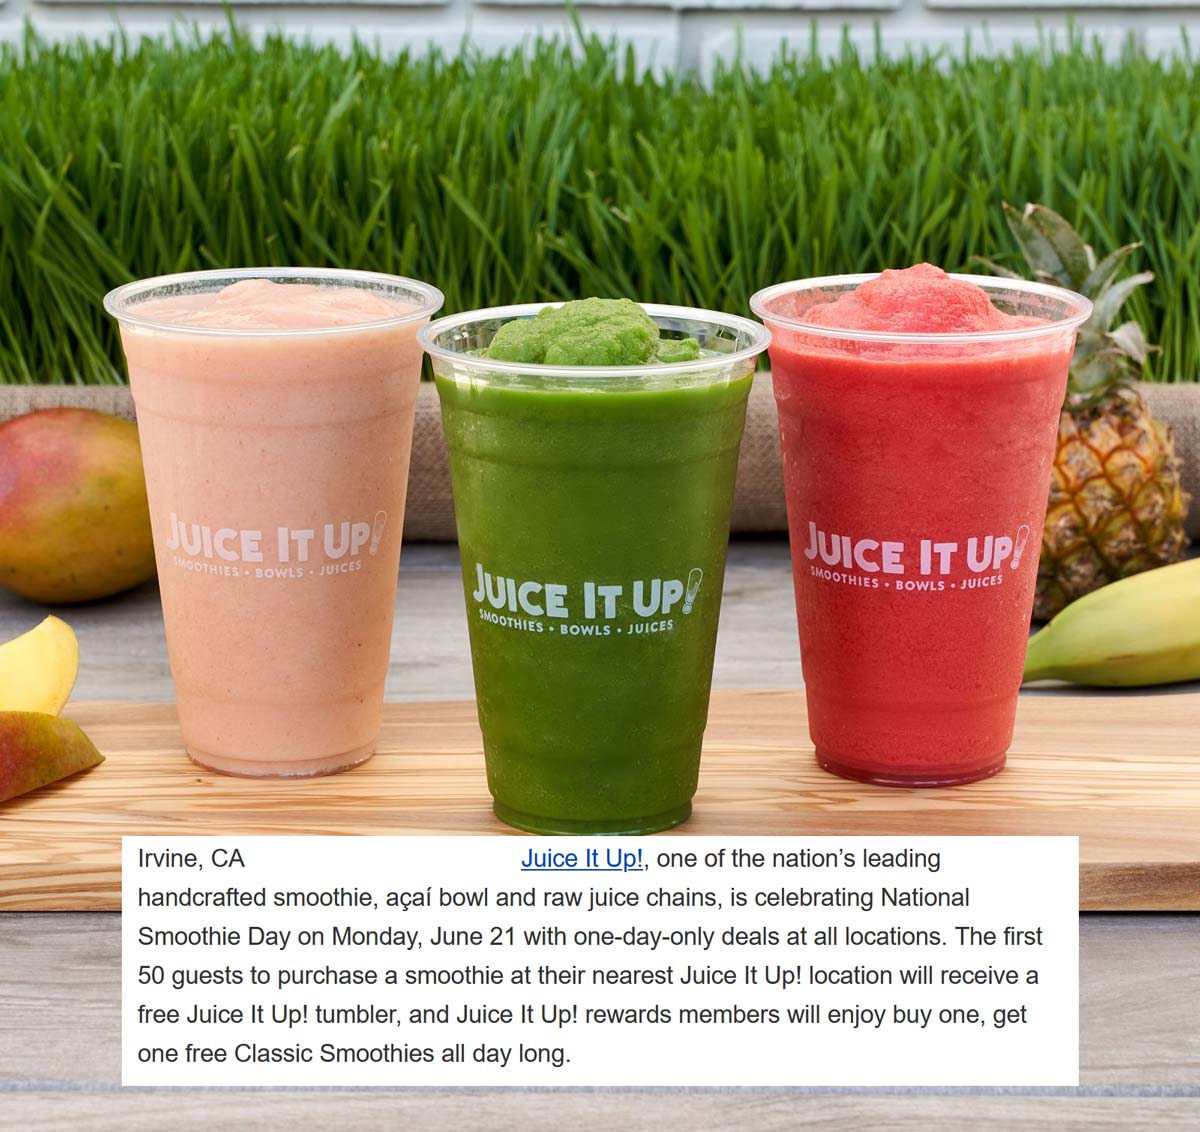 Juice It Up restaurants Coupon  Second smoothie free today at Juice It Up for rewards peeps #juiceitup 